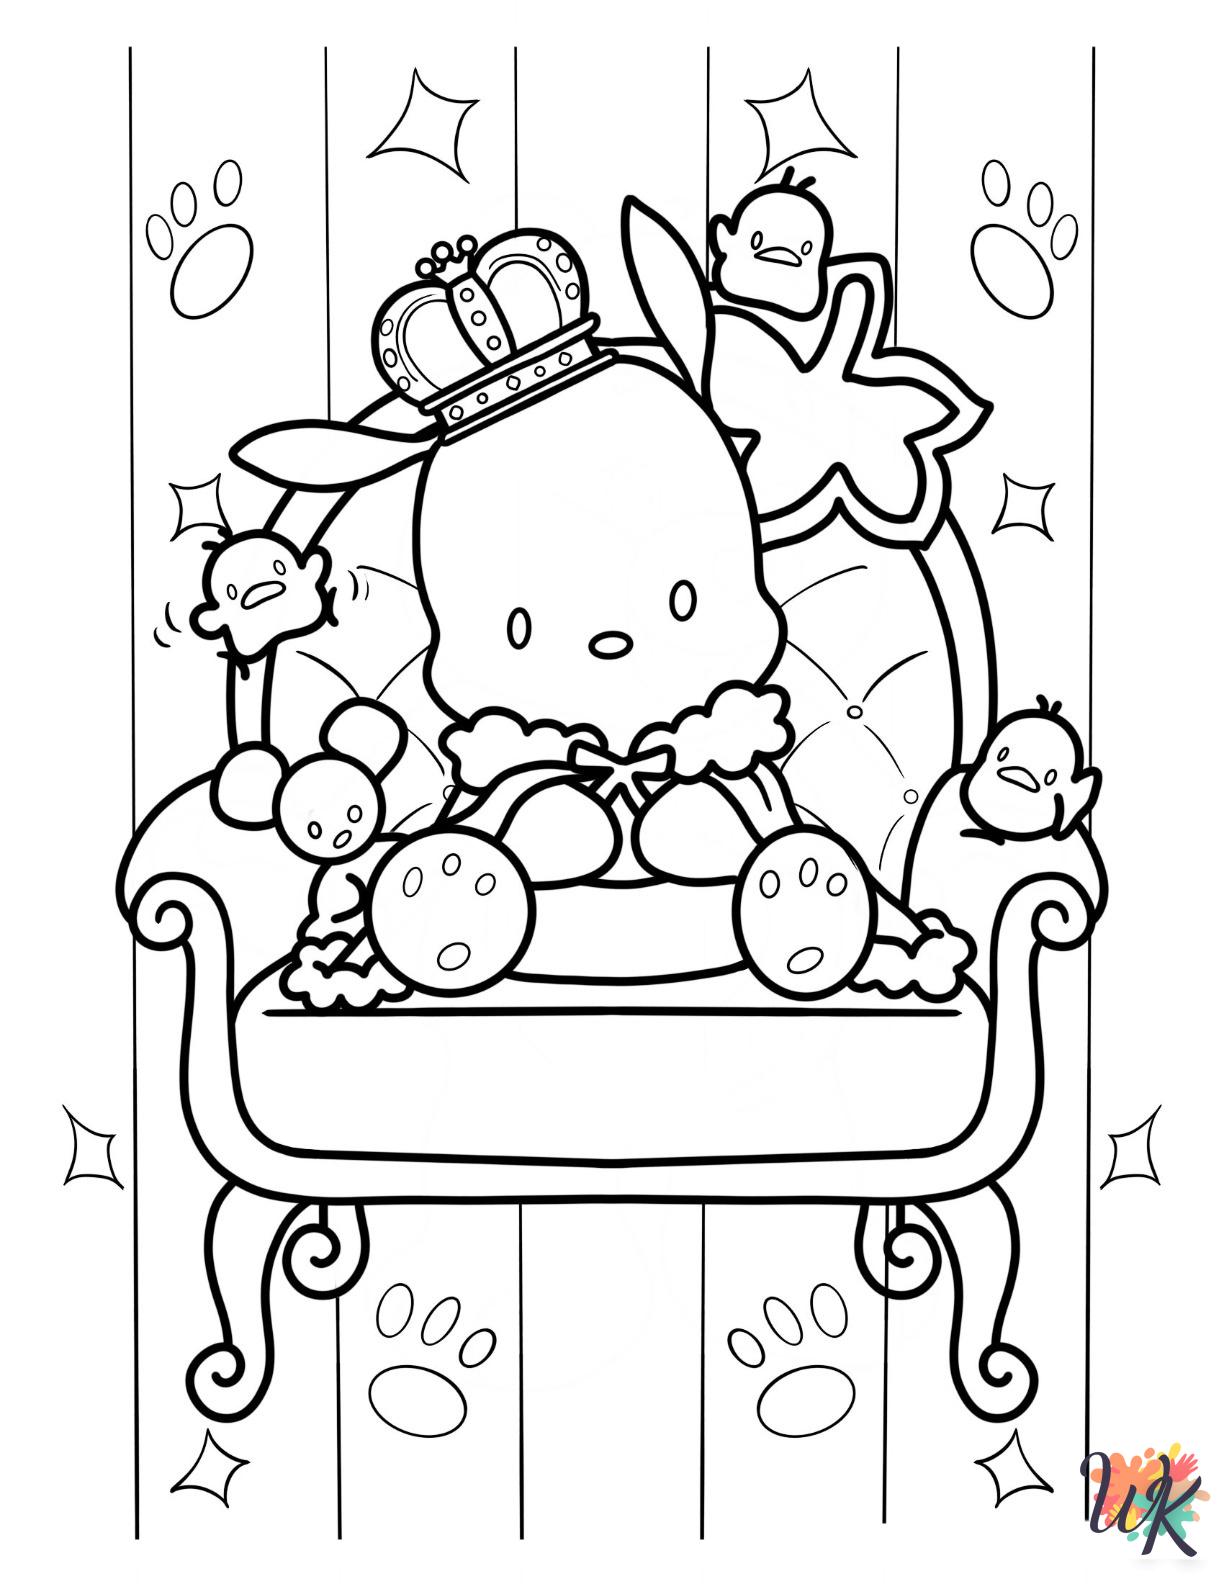 Pochacco free coloring pages